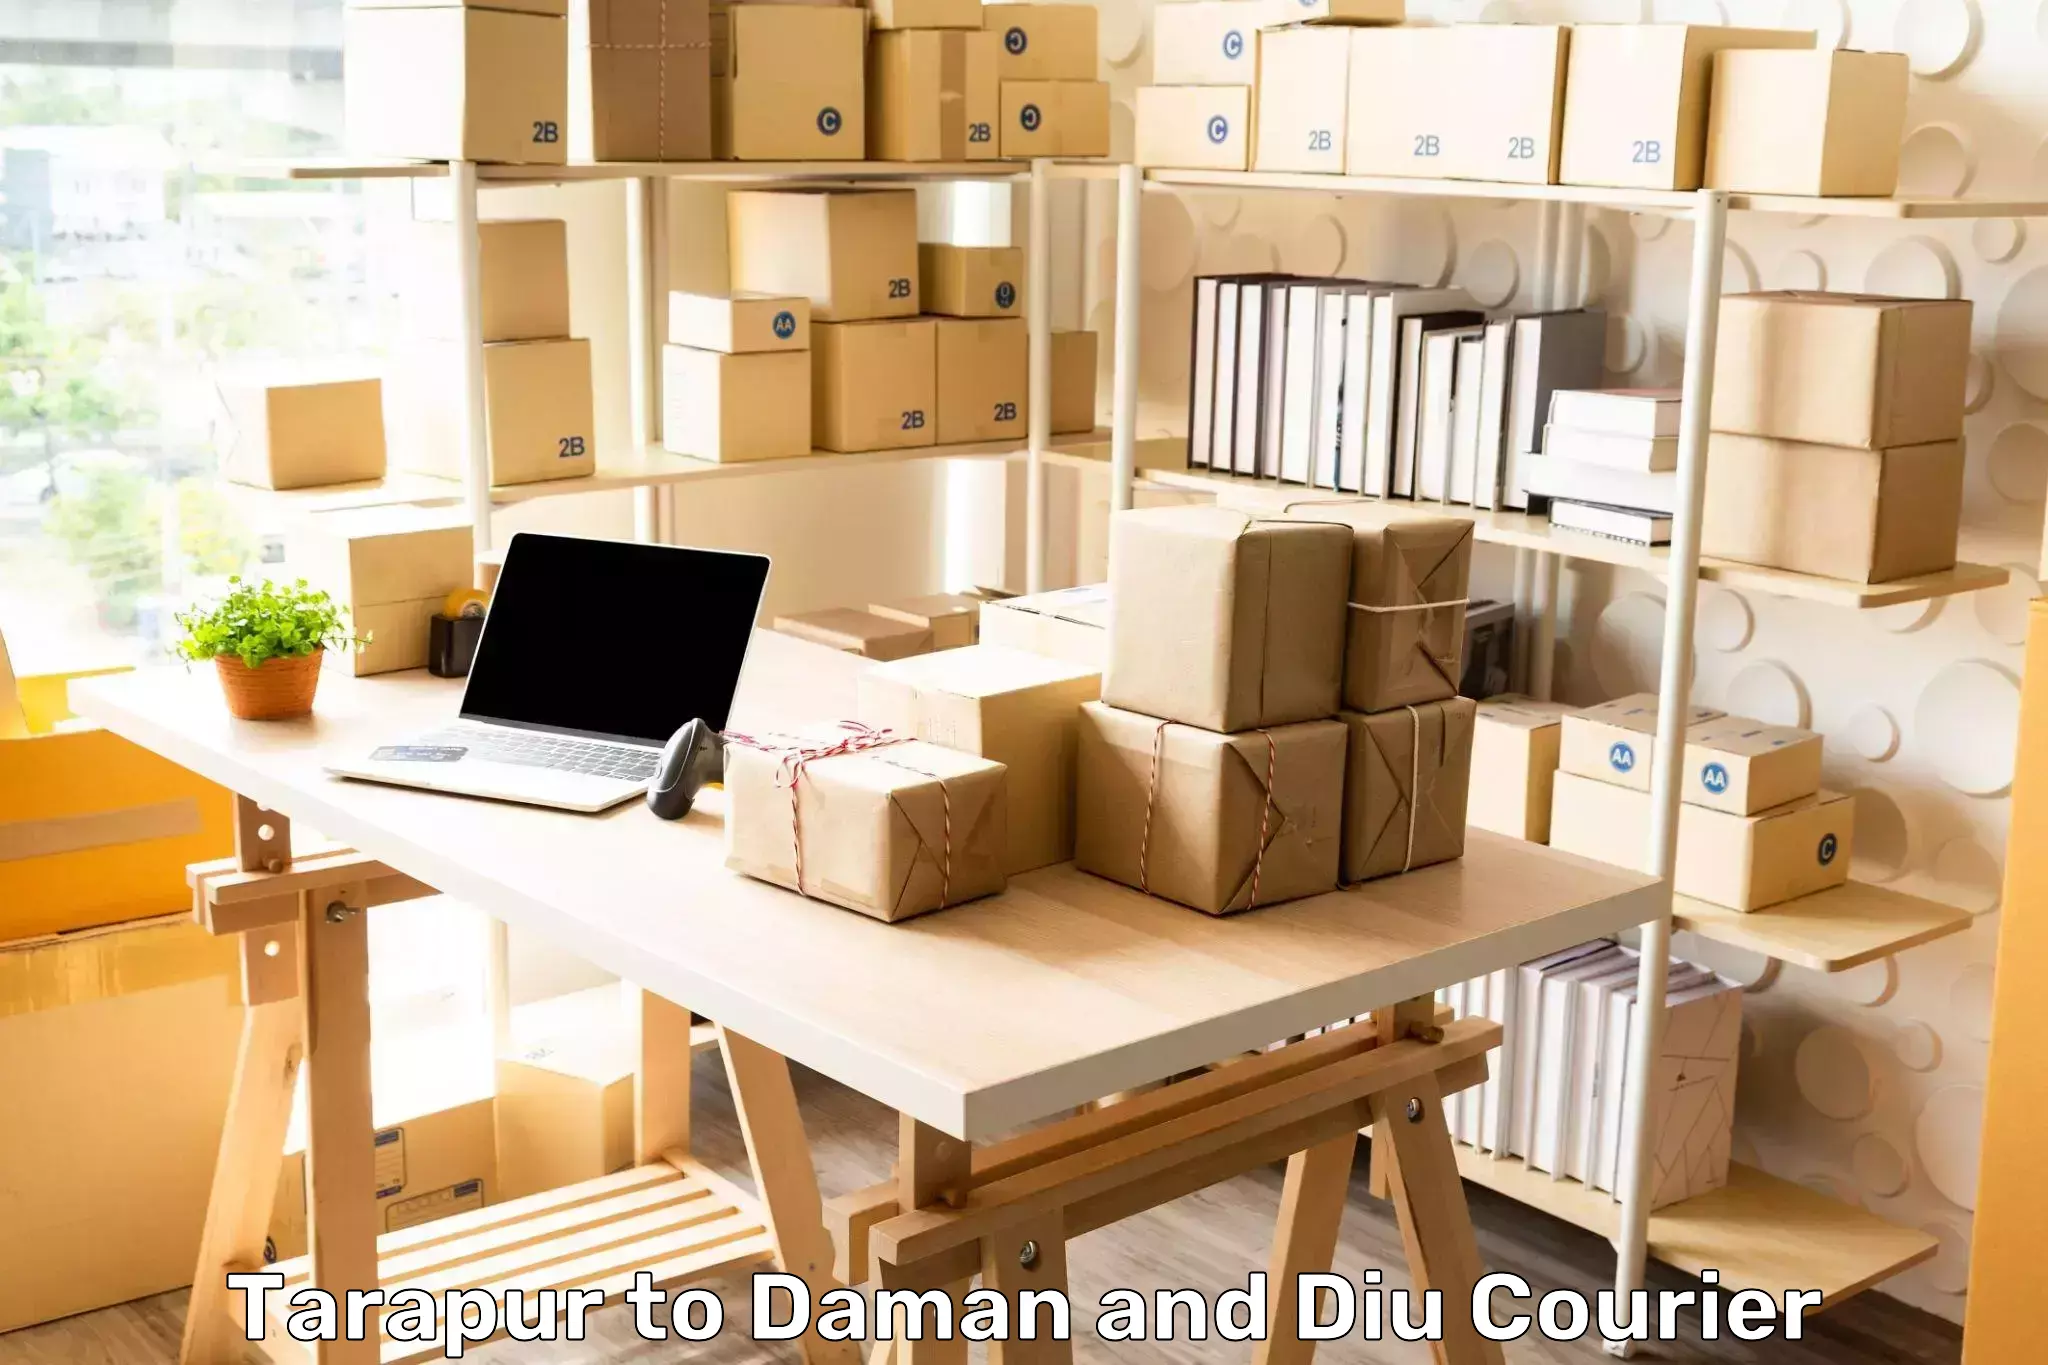 Professional parcel services in Tarapur to Daman and Diu